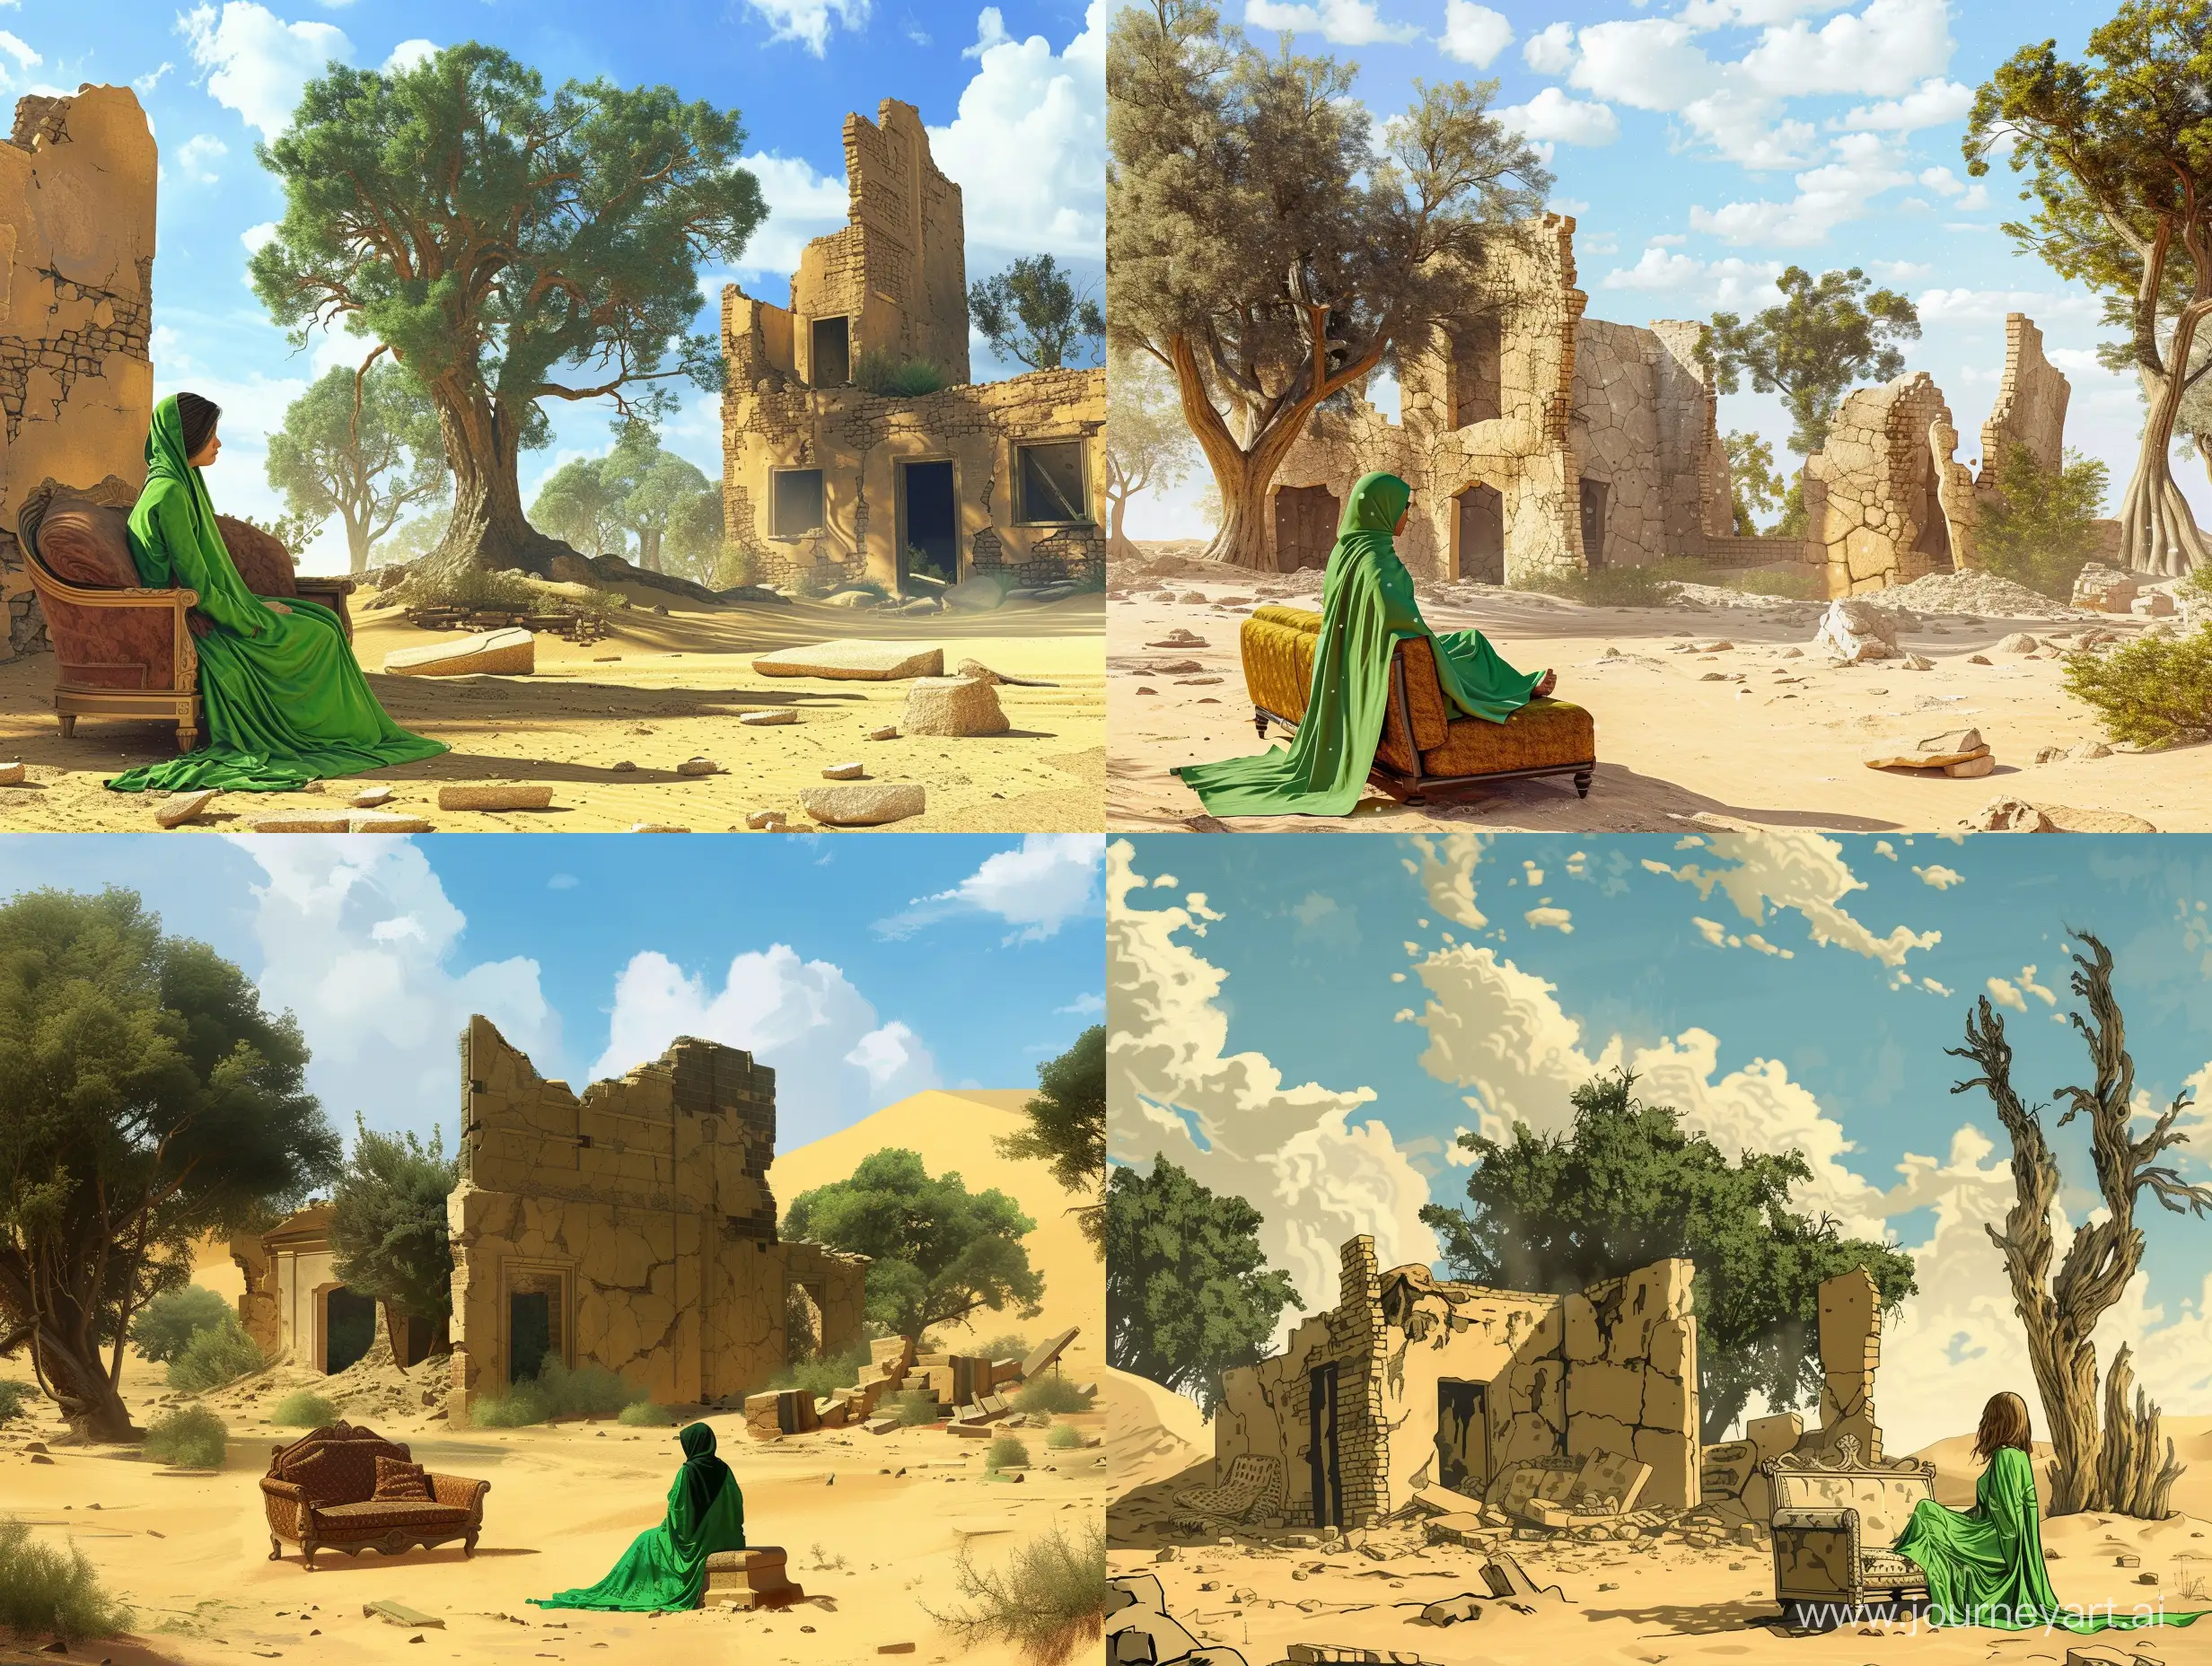 There are a ruin house on desert. In front of it, a woman in green sat on sofa and looks at the trees.